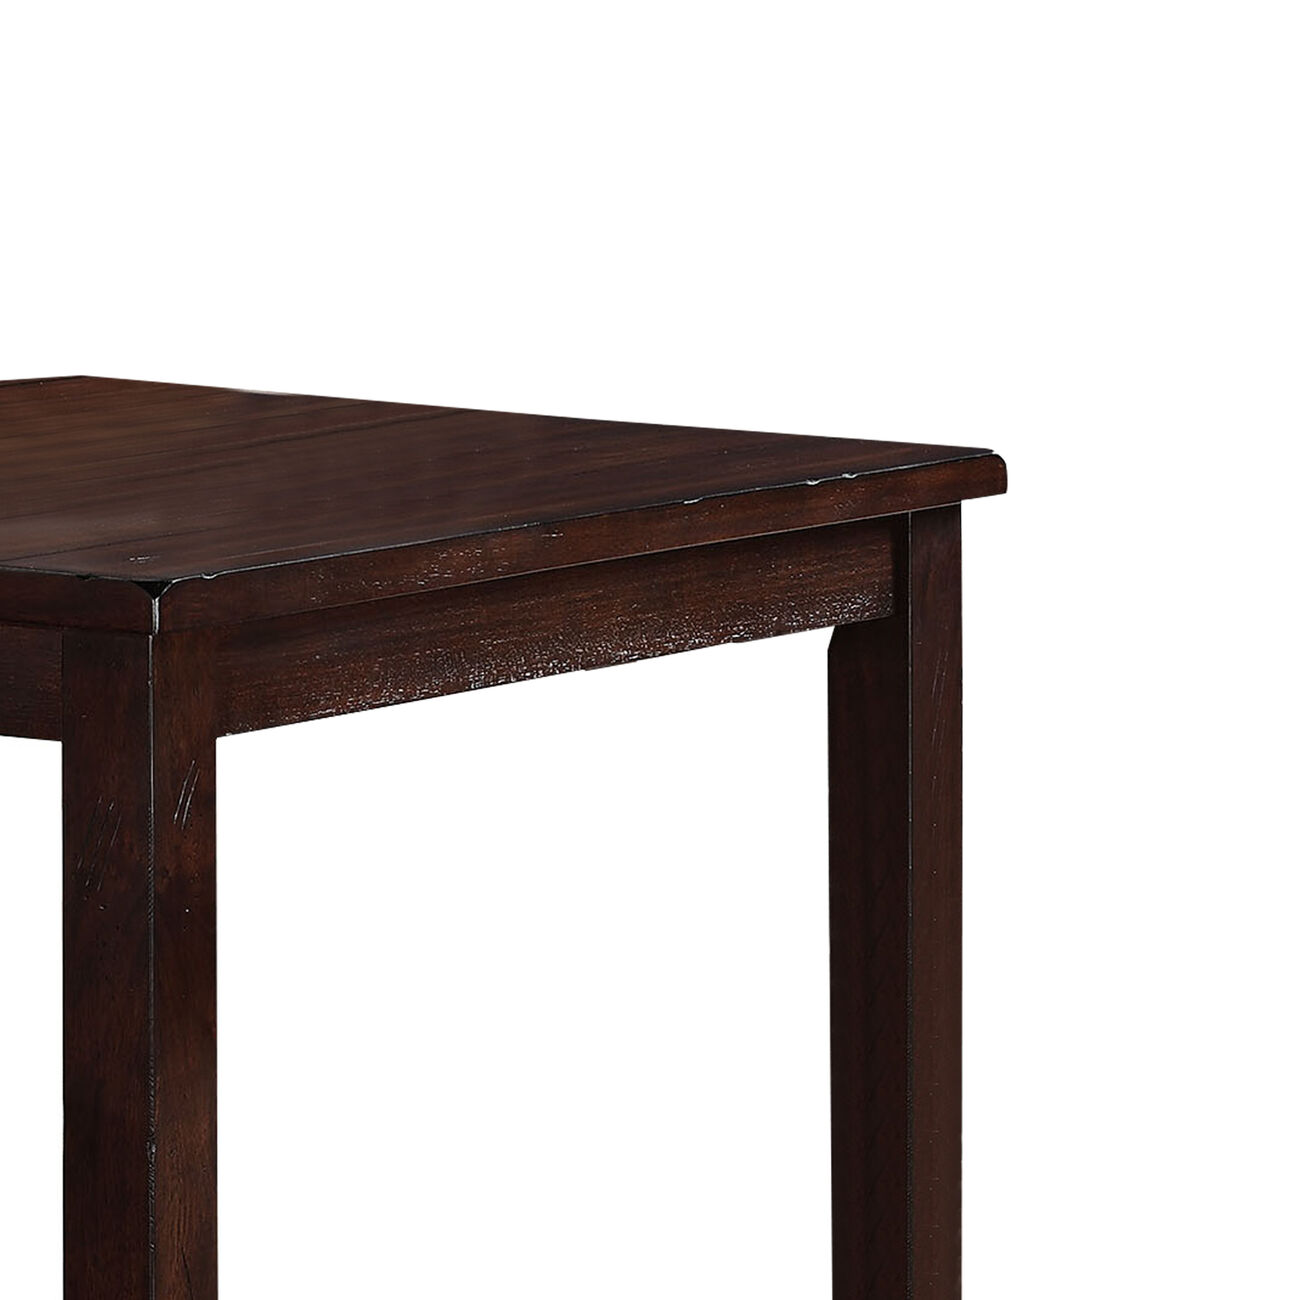 Plank Design Wooden Counter Height Dining Table with Block Legs, Brown